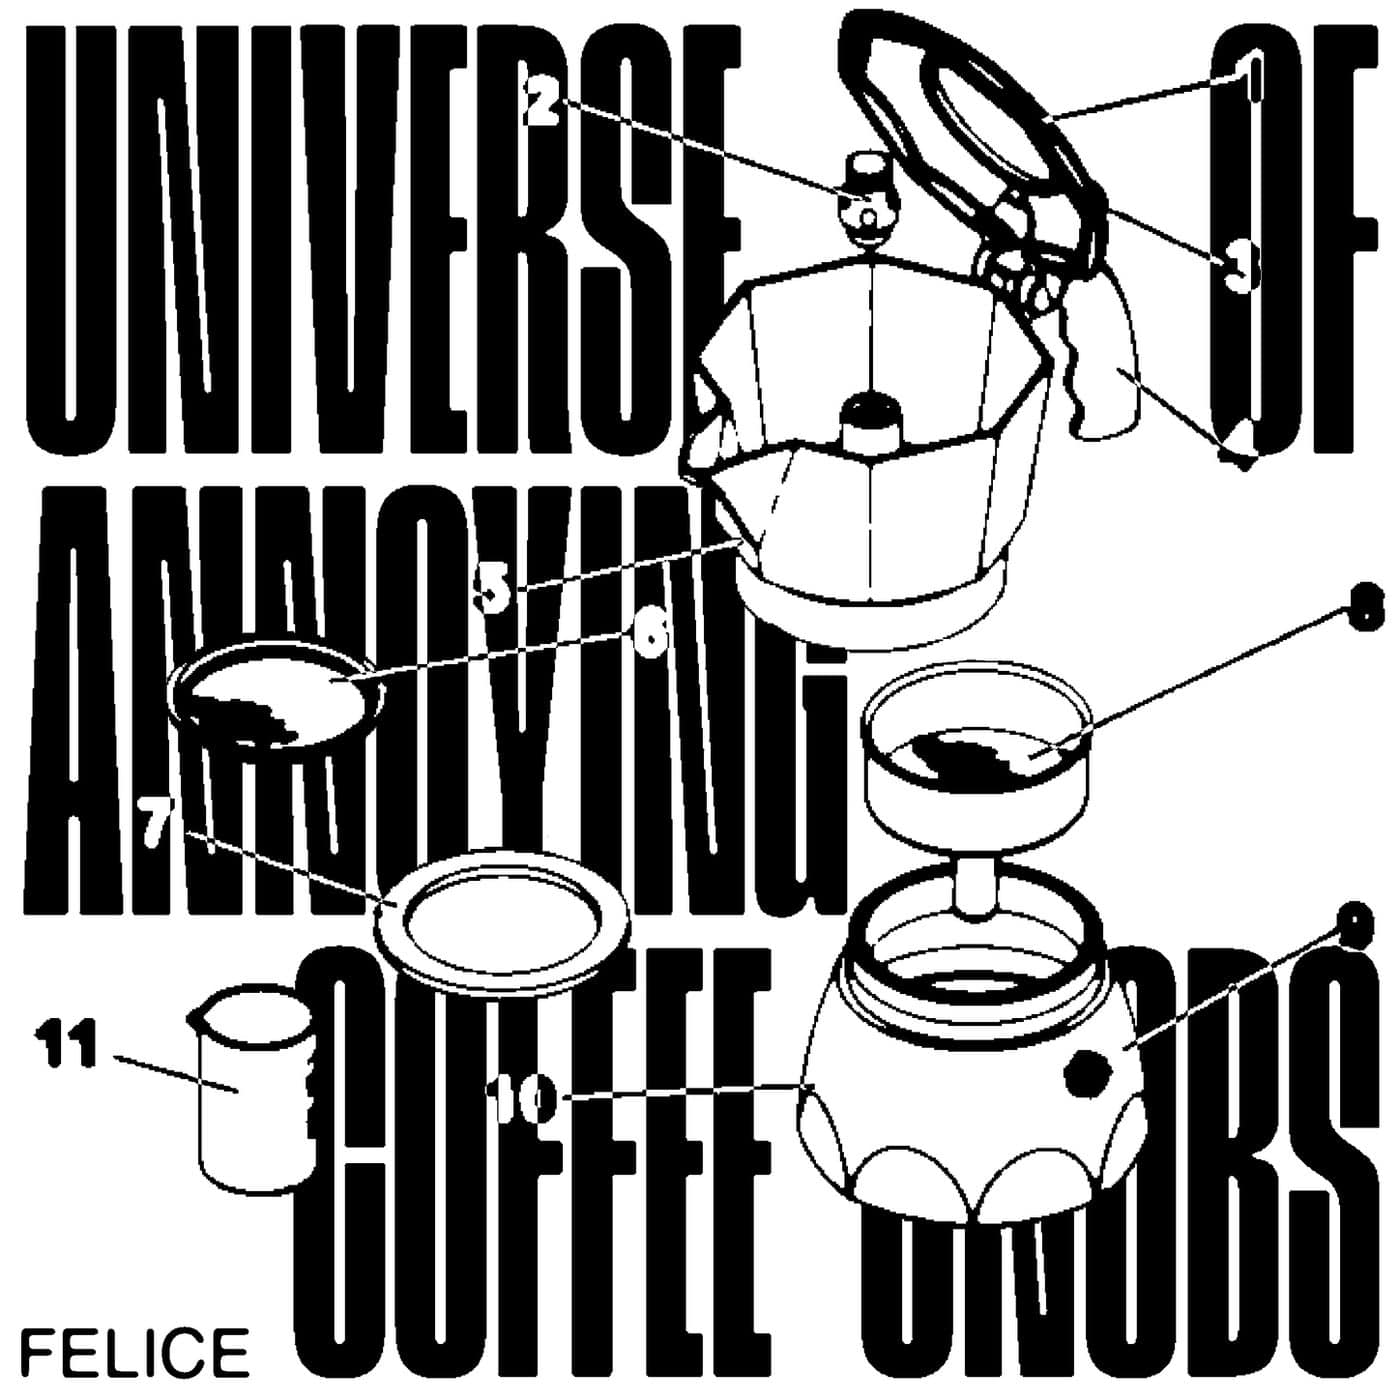 image cover: Felice - Universe of Annoying Coffee-Snobs / PERMVAC2581